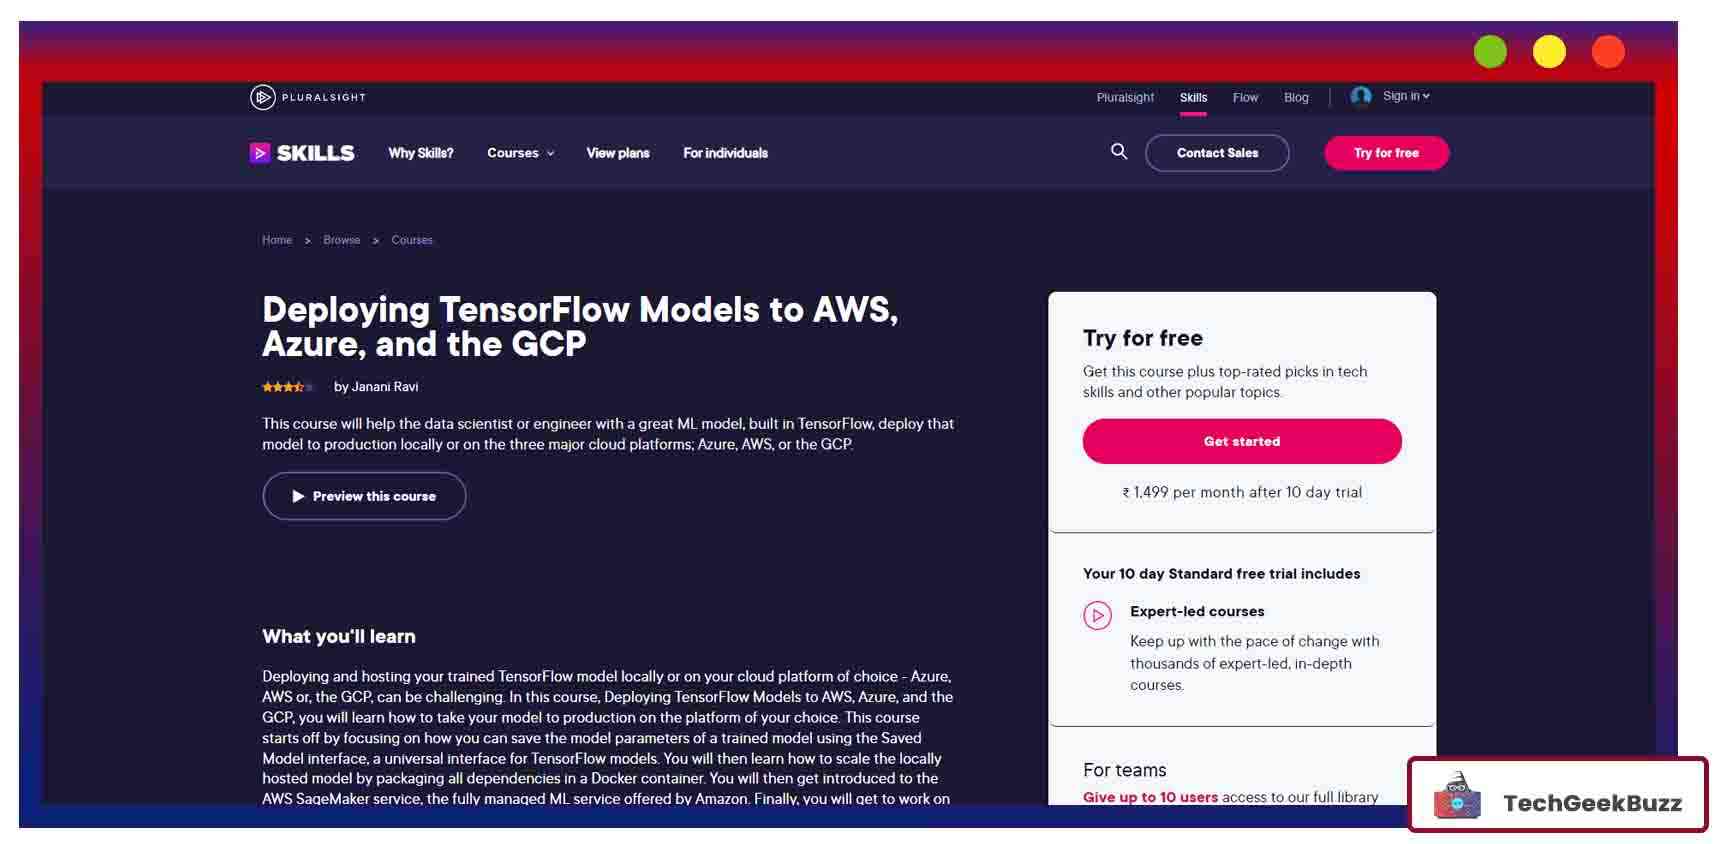 Deploying TensorFlow Models to AWS, Azure, and the GCP